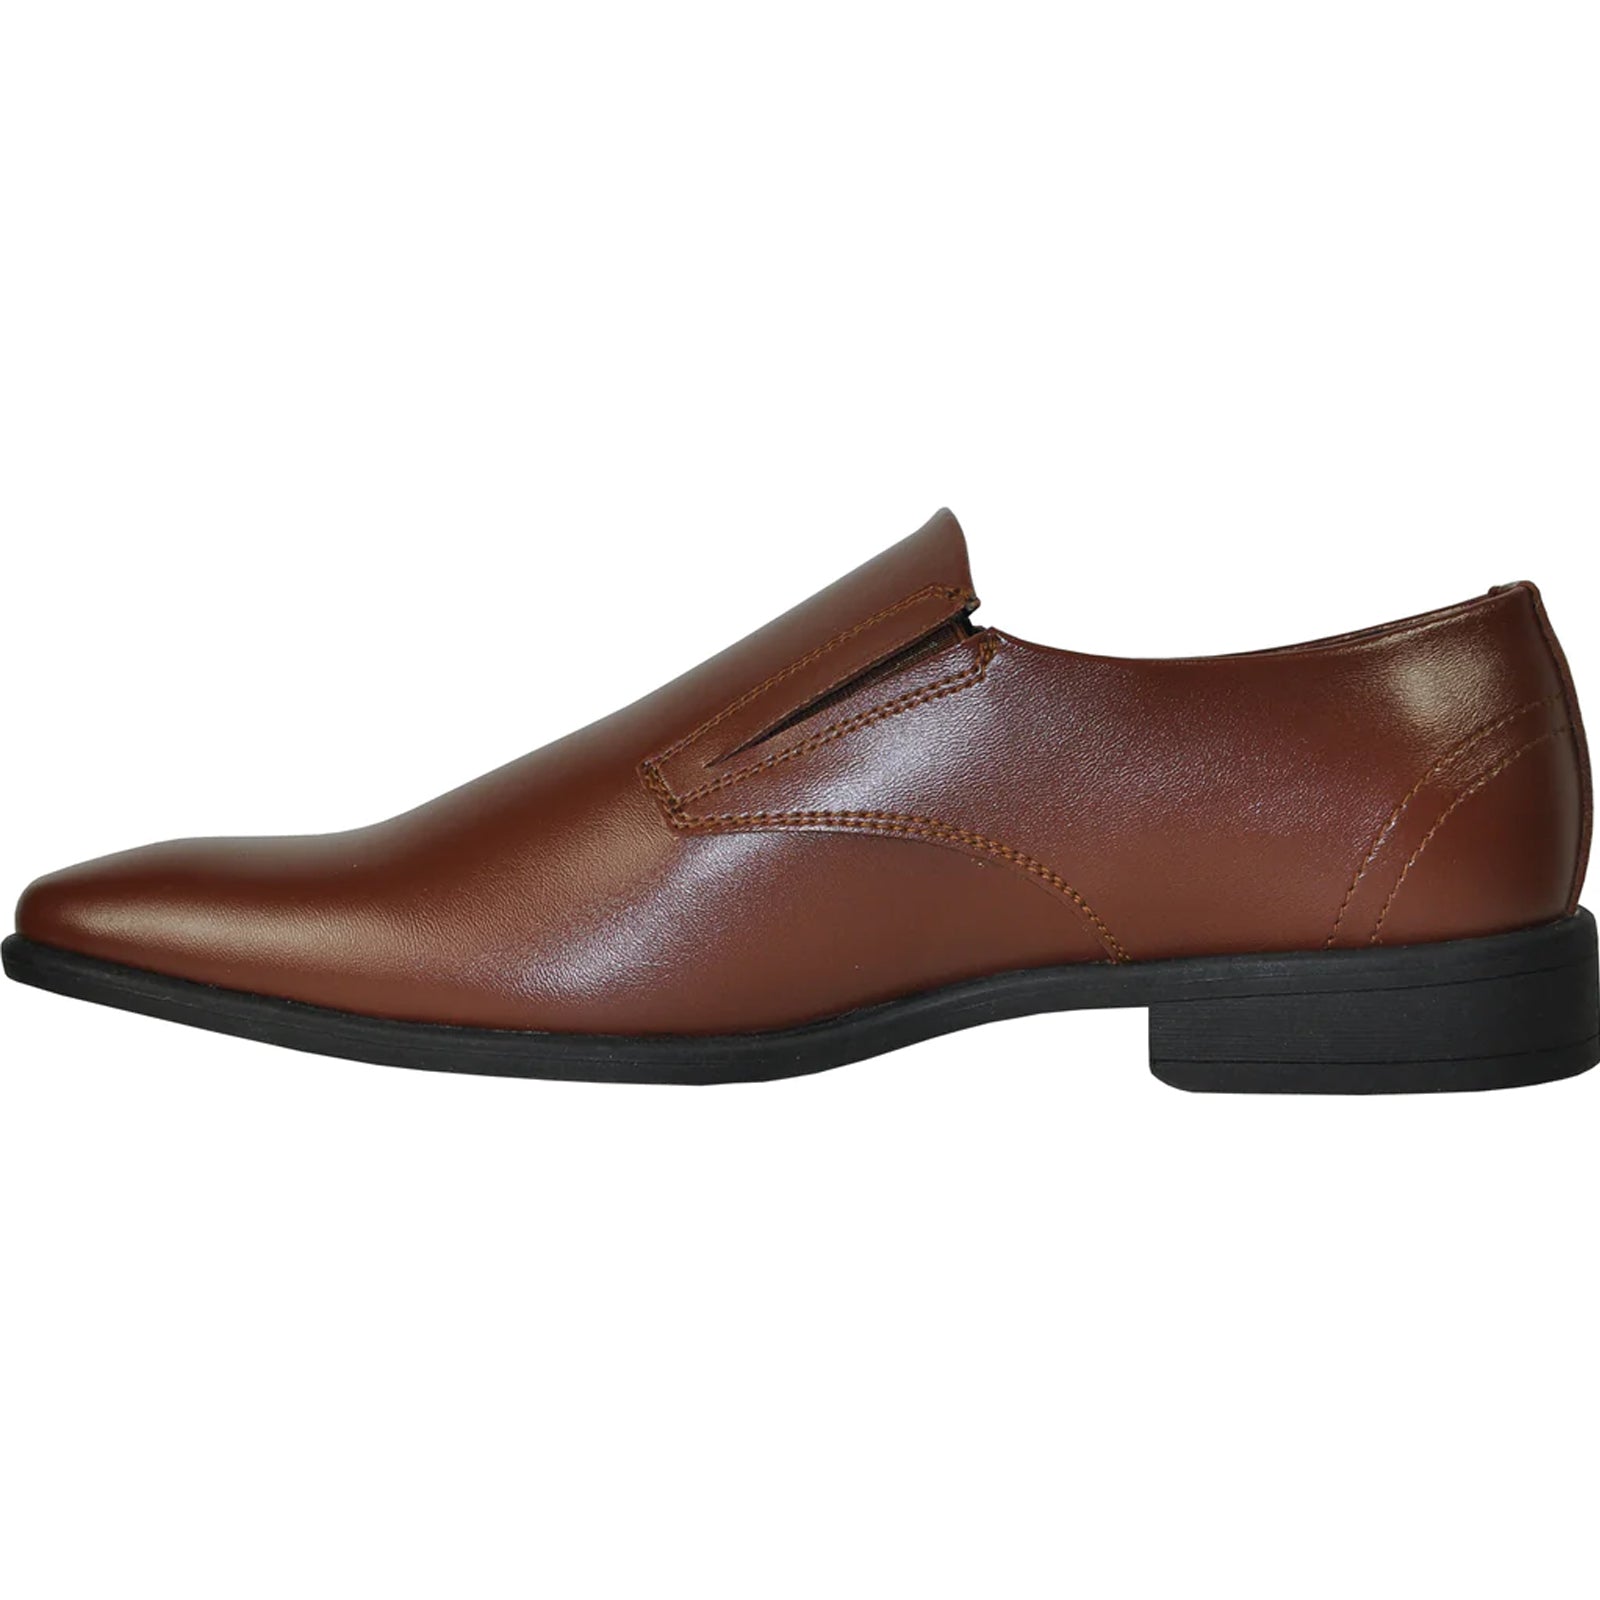 "Brown Men's Dress Loafer - Plain Pointy Square Toe Style"